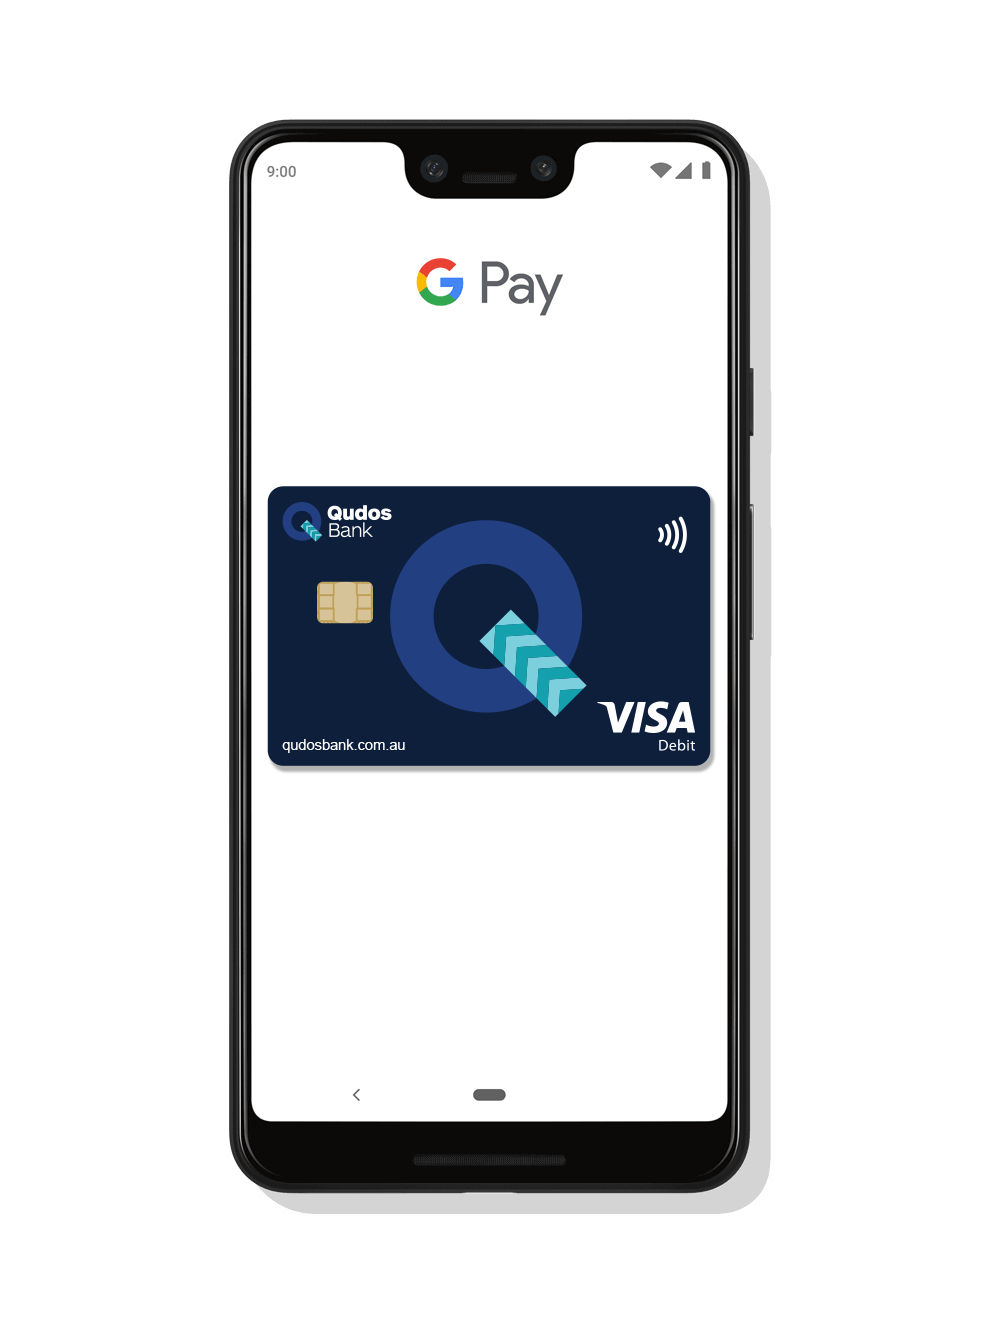 Google Phone showing Google Pay with Qudos Bank Debit Card